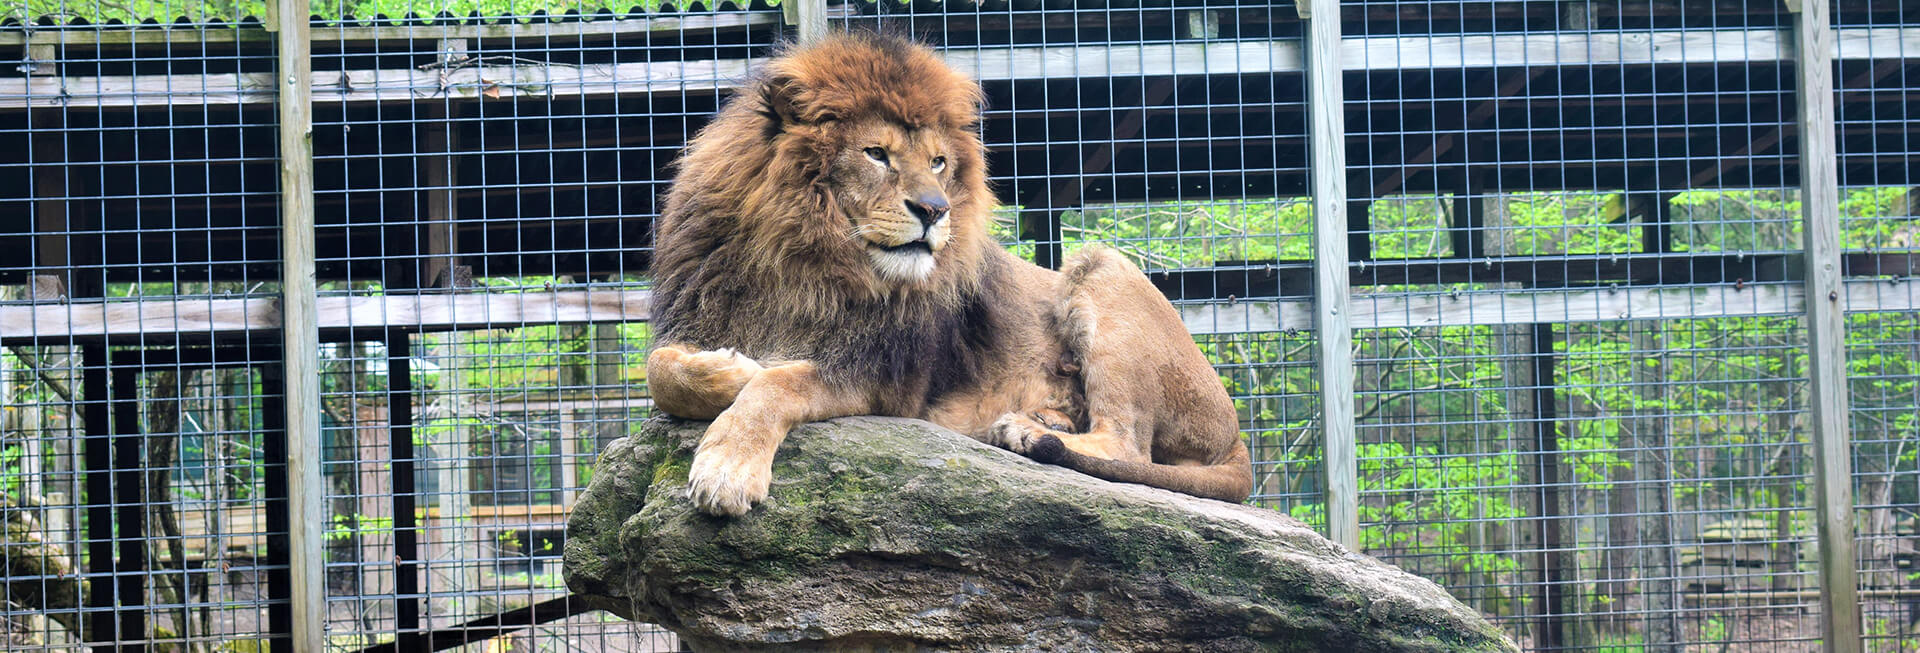 Claws 'N' Paws Wild Animal Park | visitPA